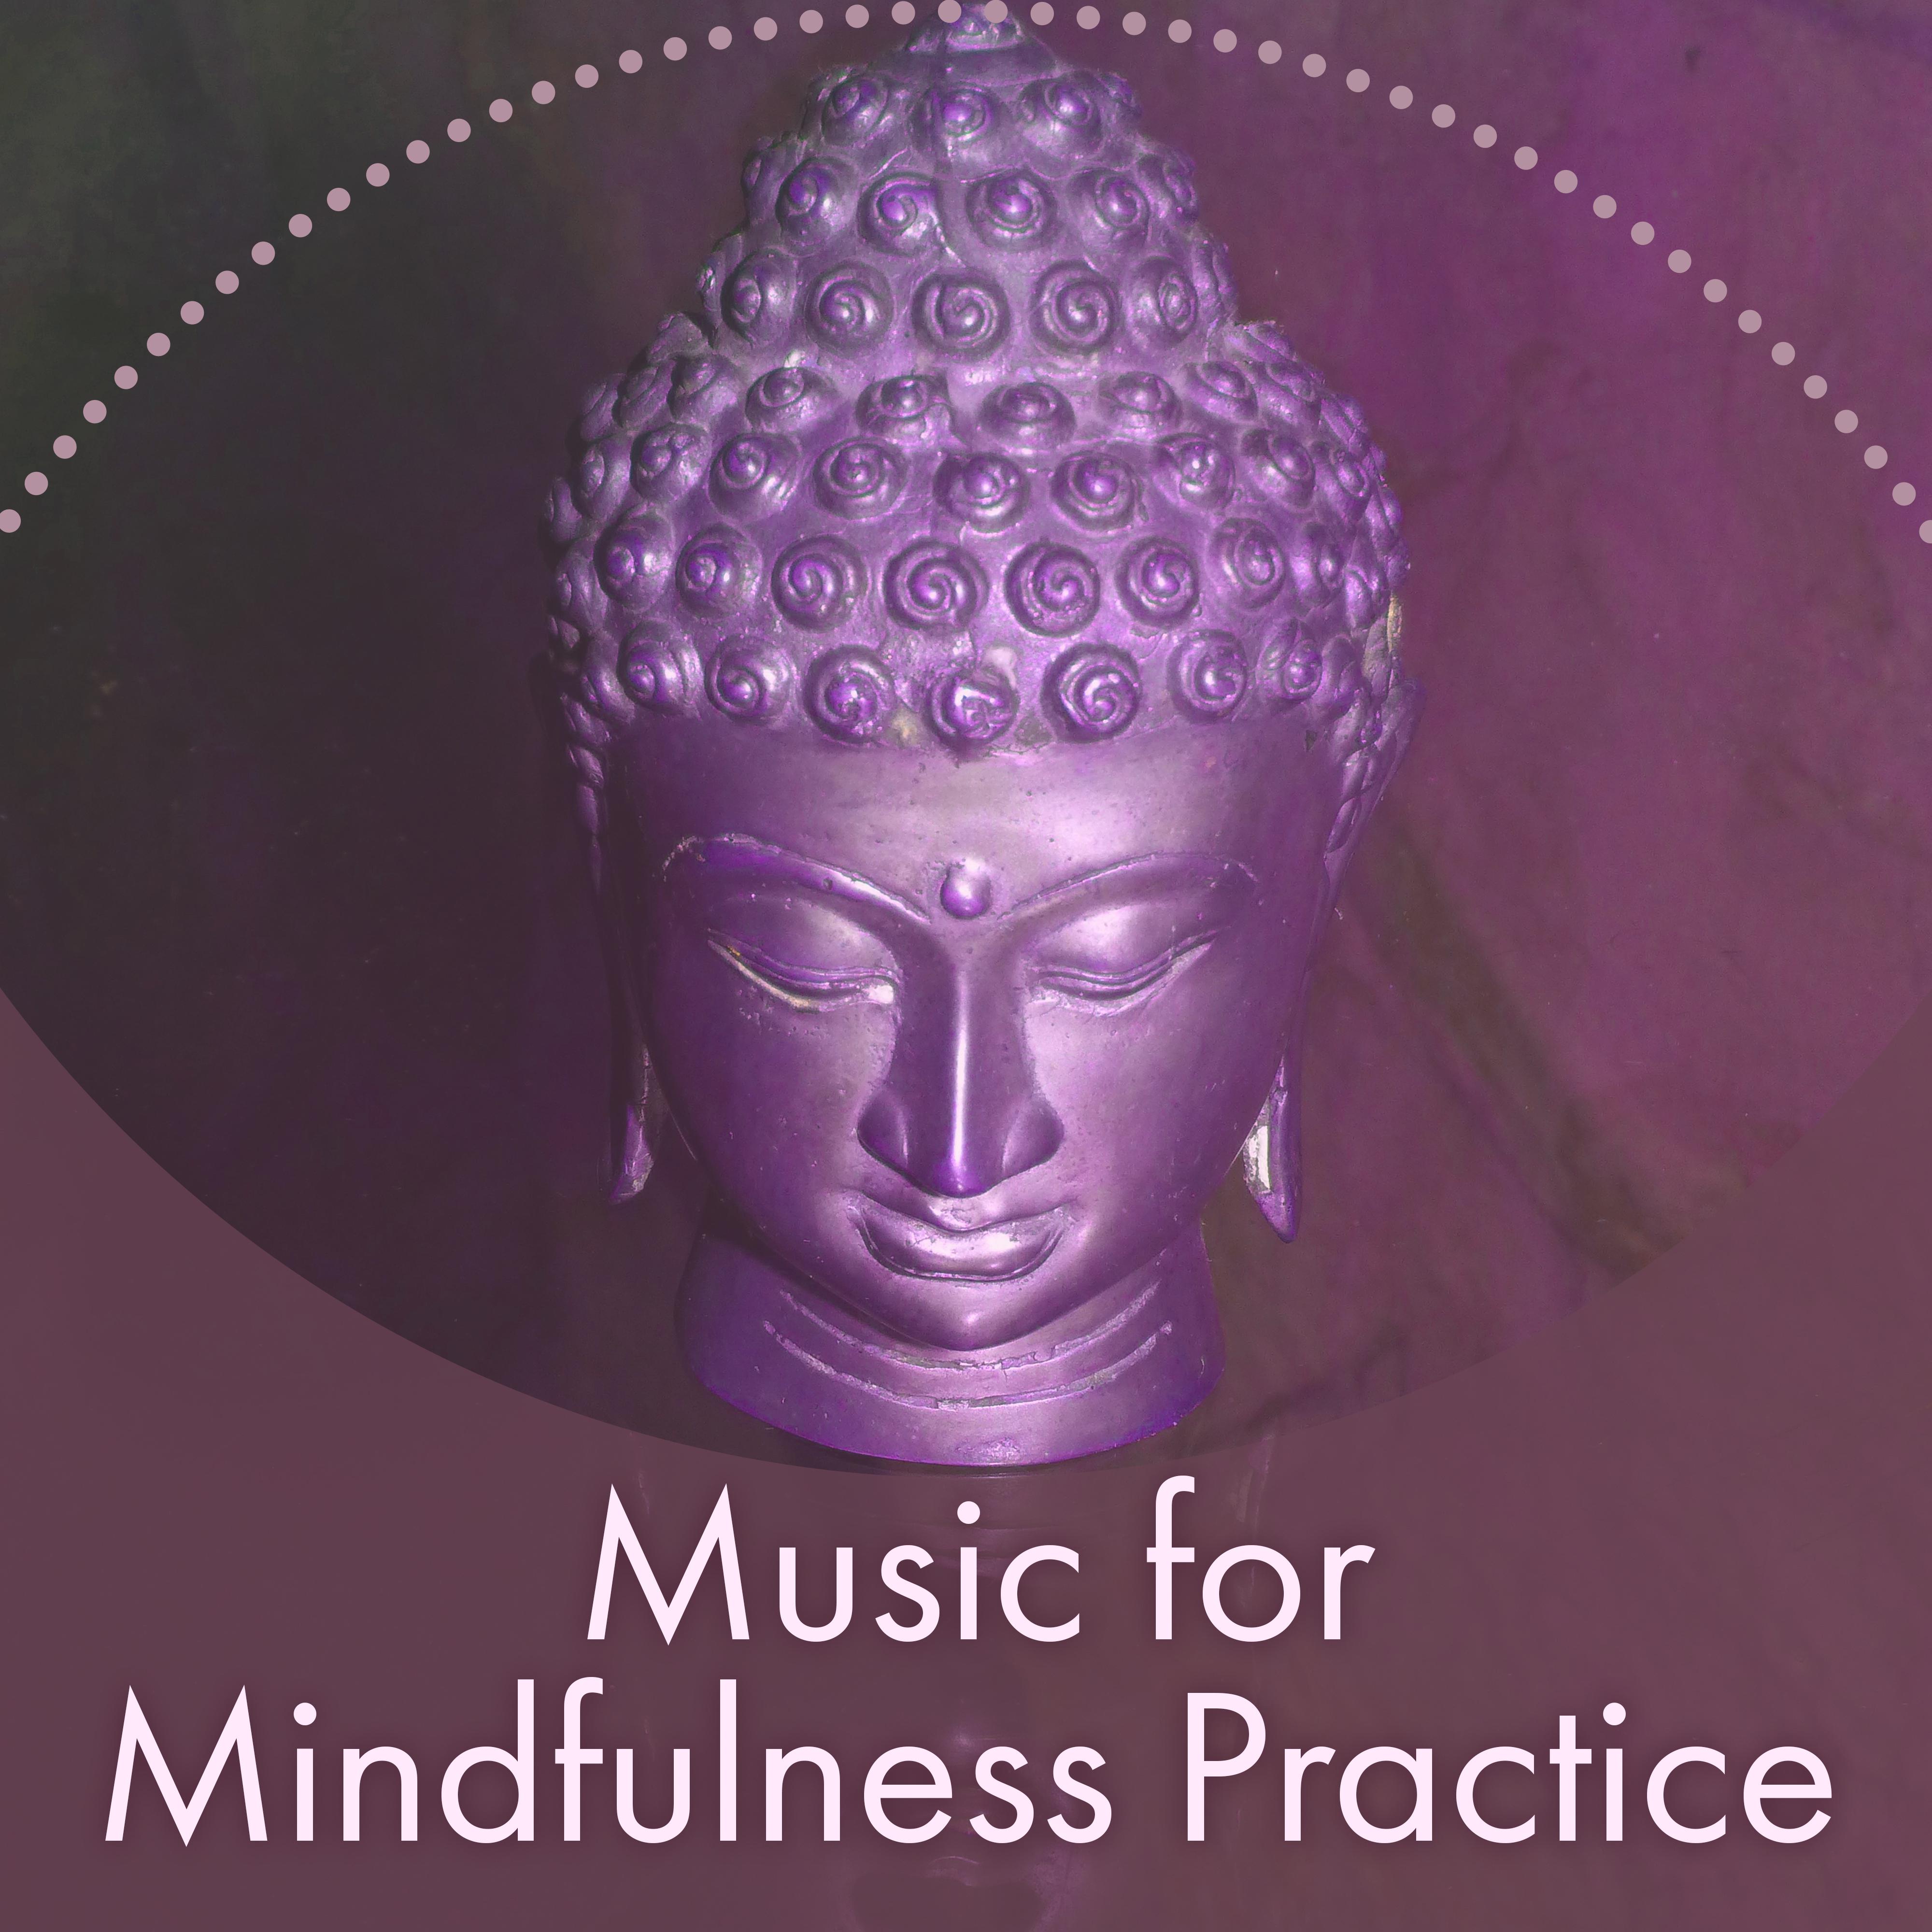 Music for Mindfulness Practice  Calming Sounds of Nature, Helpful for Meditation, Keep Focus, Music for Learning